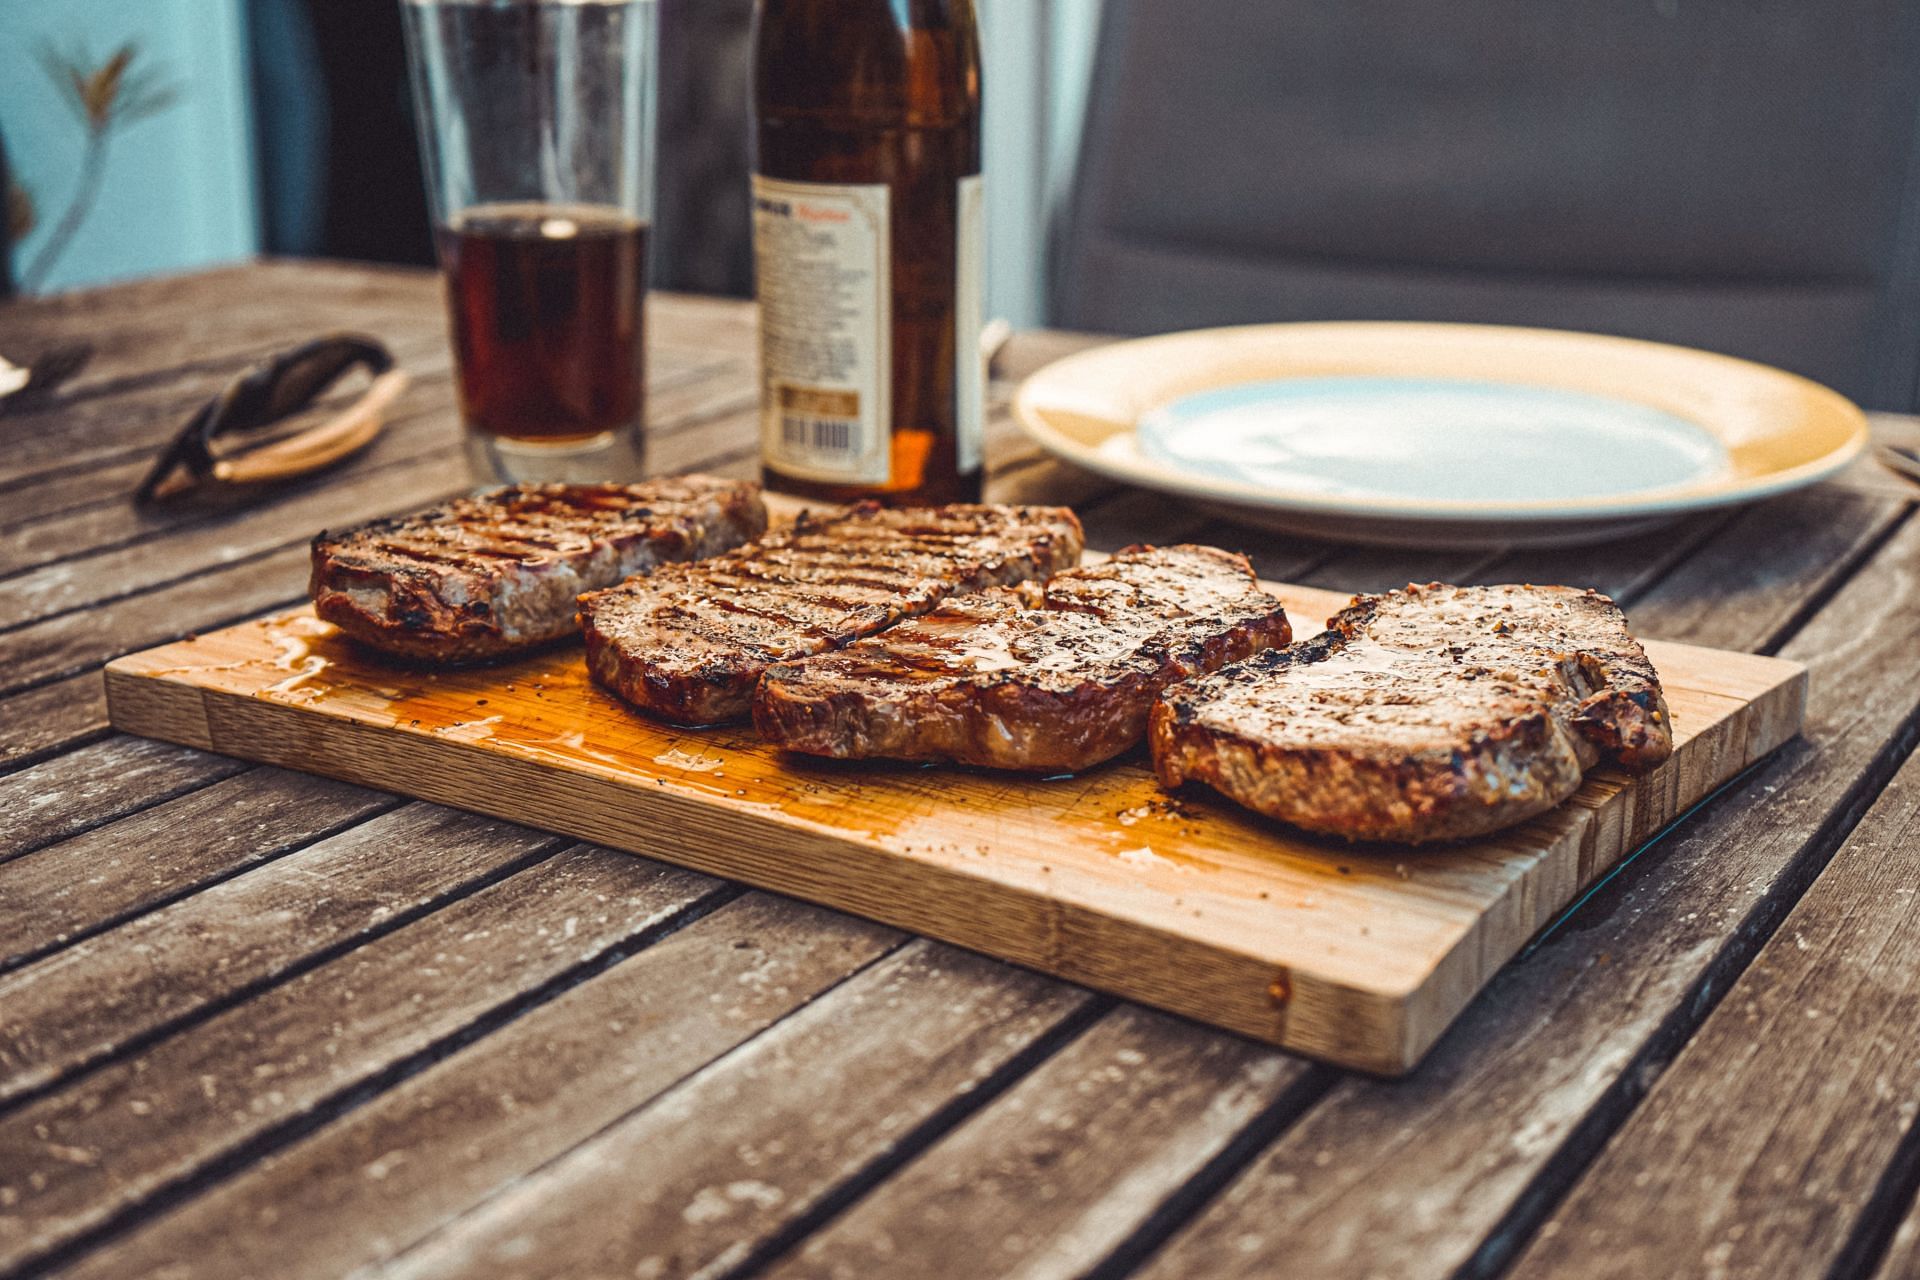 Meats seared at high temperatures form high levels of inflammatory compounds (Image via Pexels/Tim Russman)